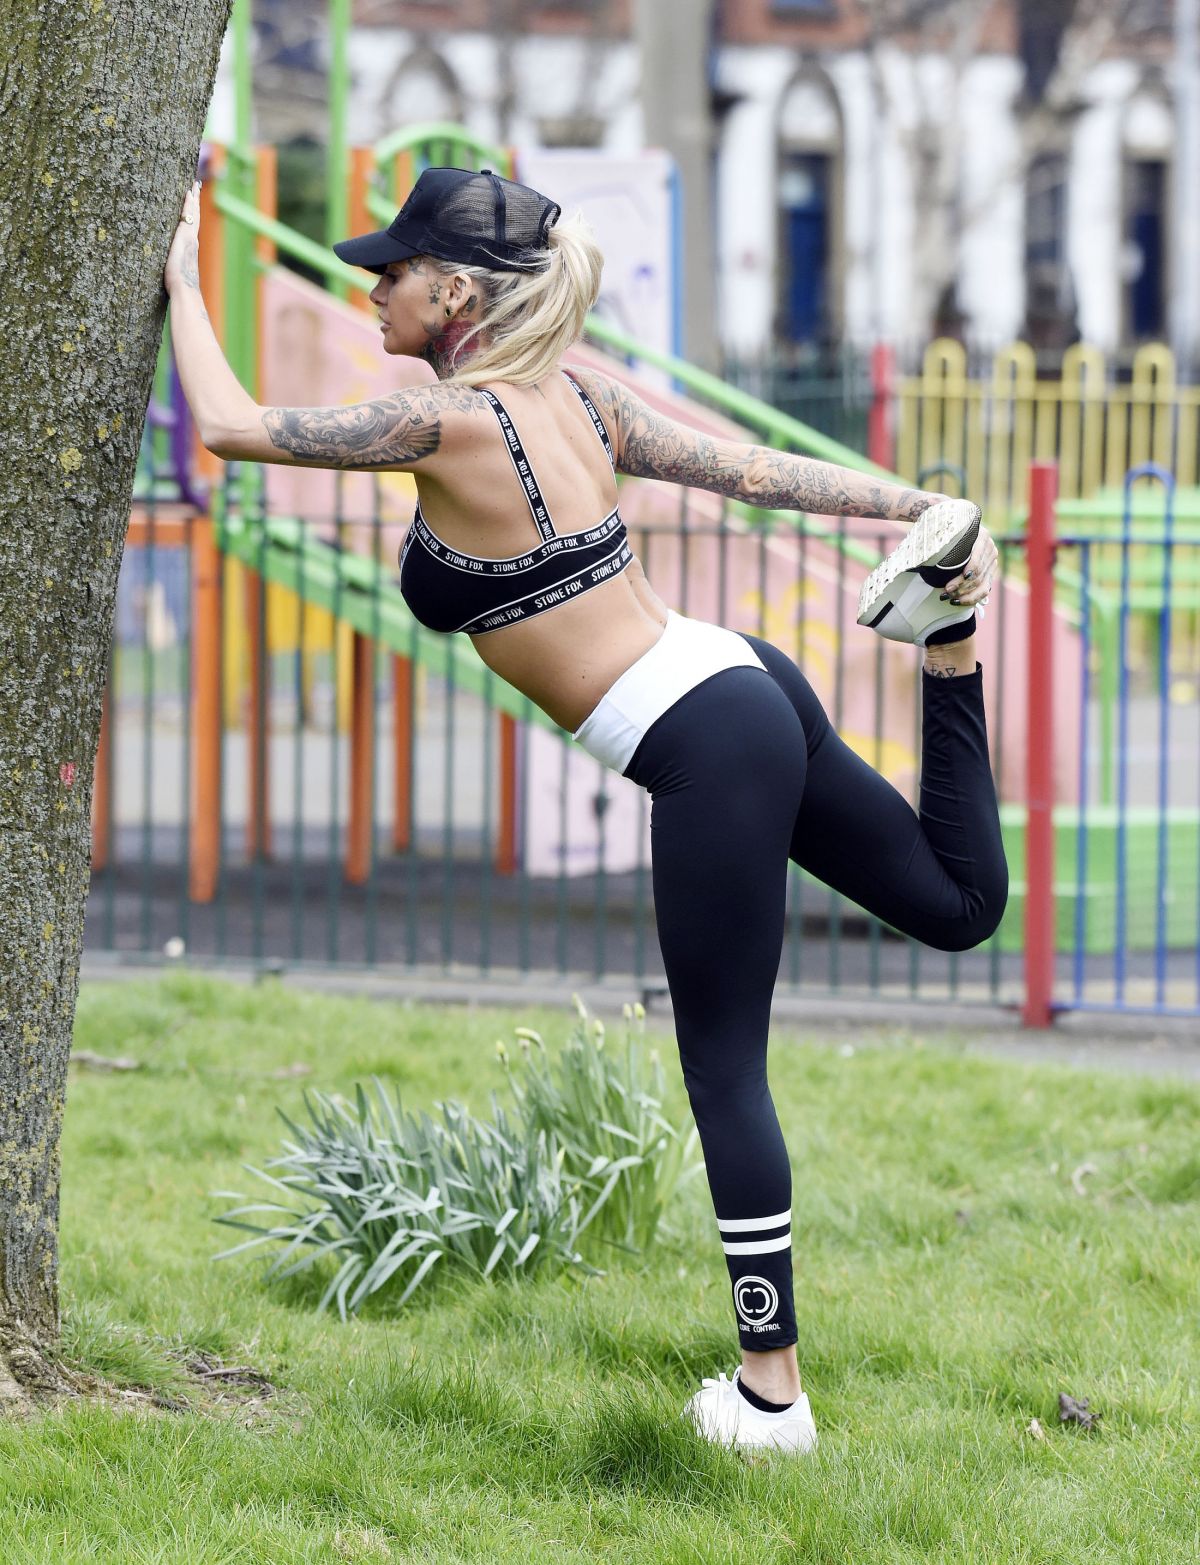 jemma-lucy-working-out-at-a-park-in-manchester-03-28-2016_3.jpg